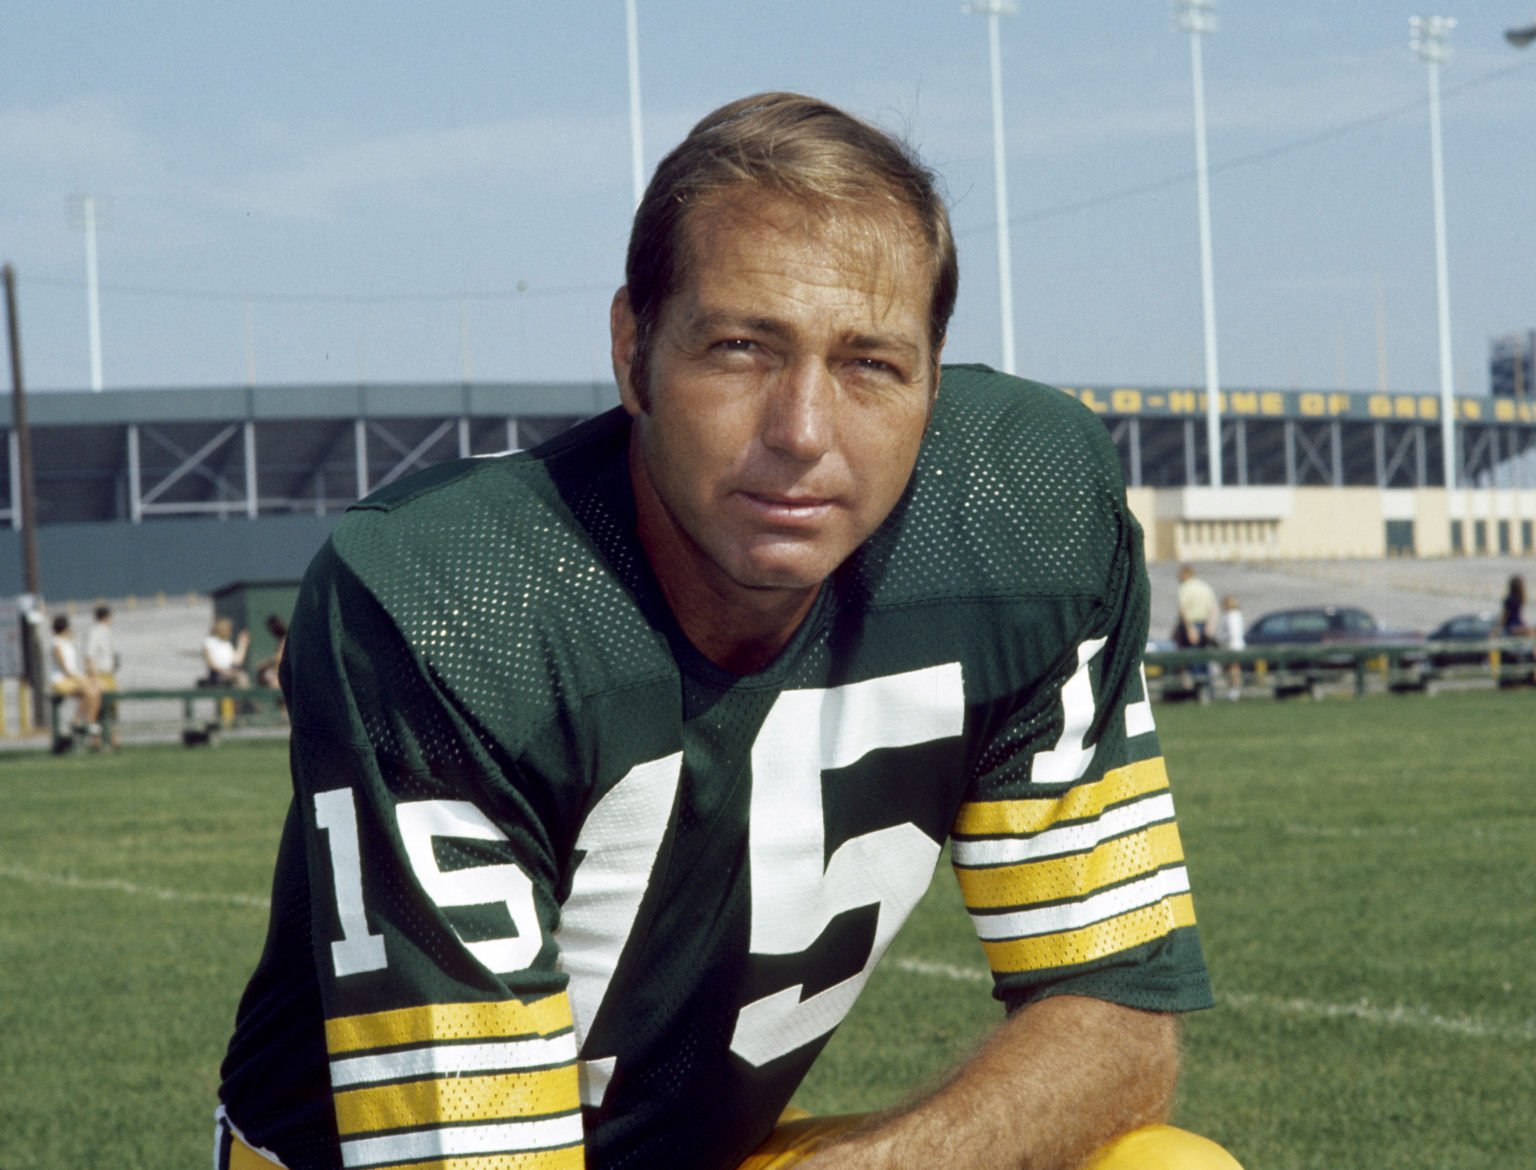 Bart Starr Best Players to Wear 15 in NFL History